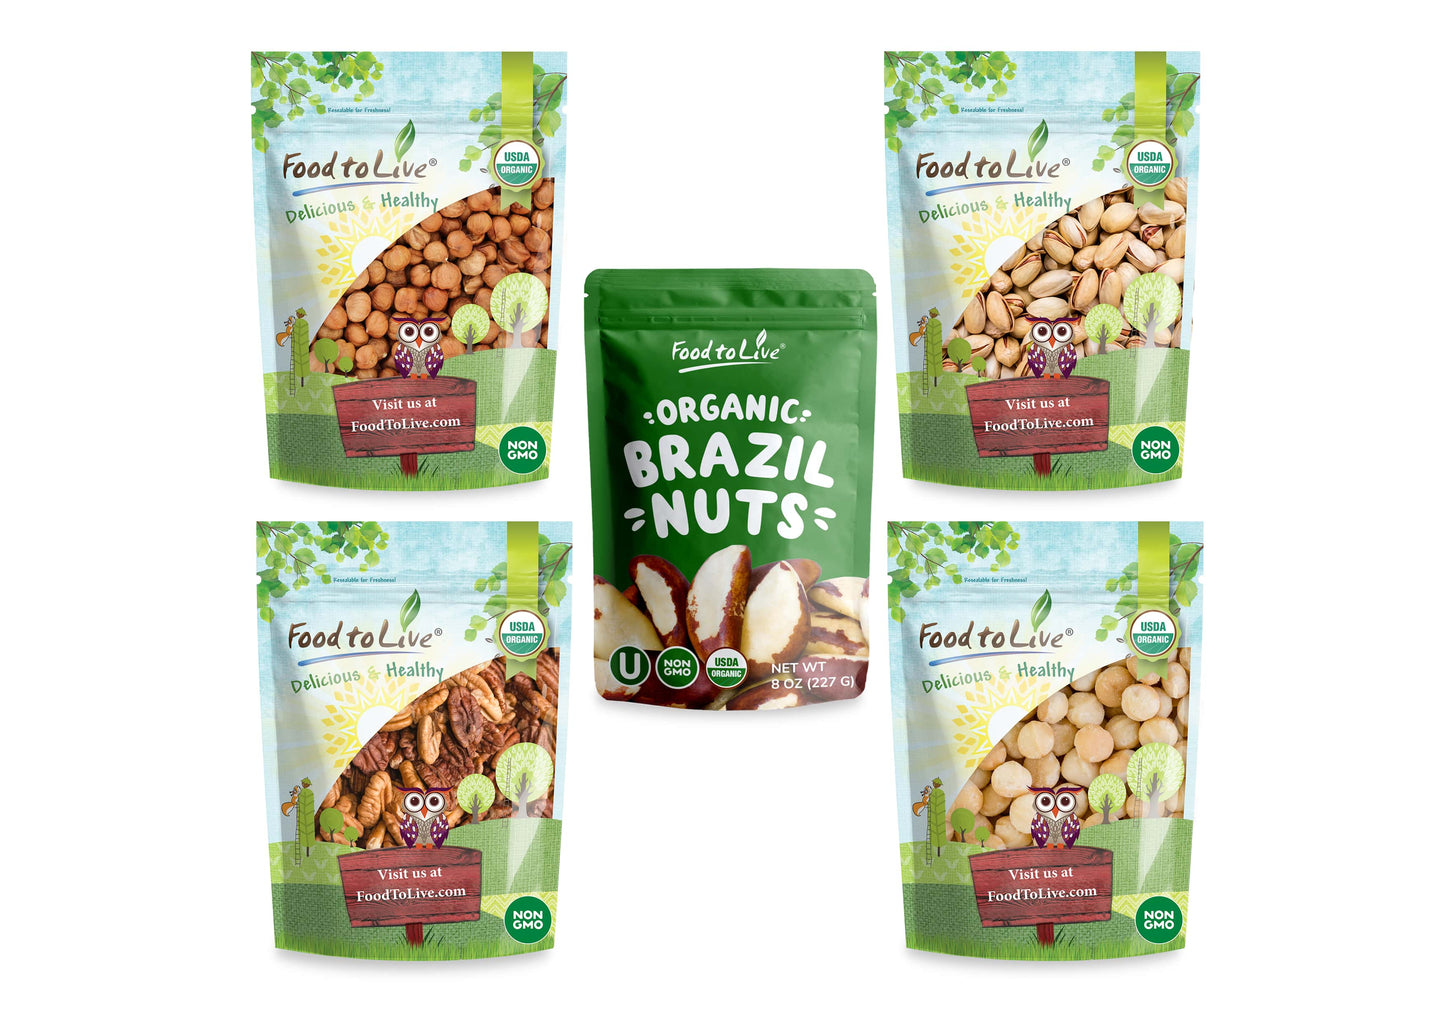 Organic Delicious Nuts in a Gift Box - Pecans, Hazelnuts, Brazil Nuts, Macadamia Nuts, and Roasted & Salted Pistachios - by Food to Live